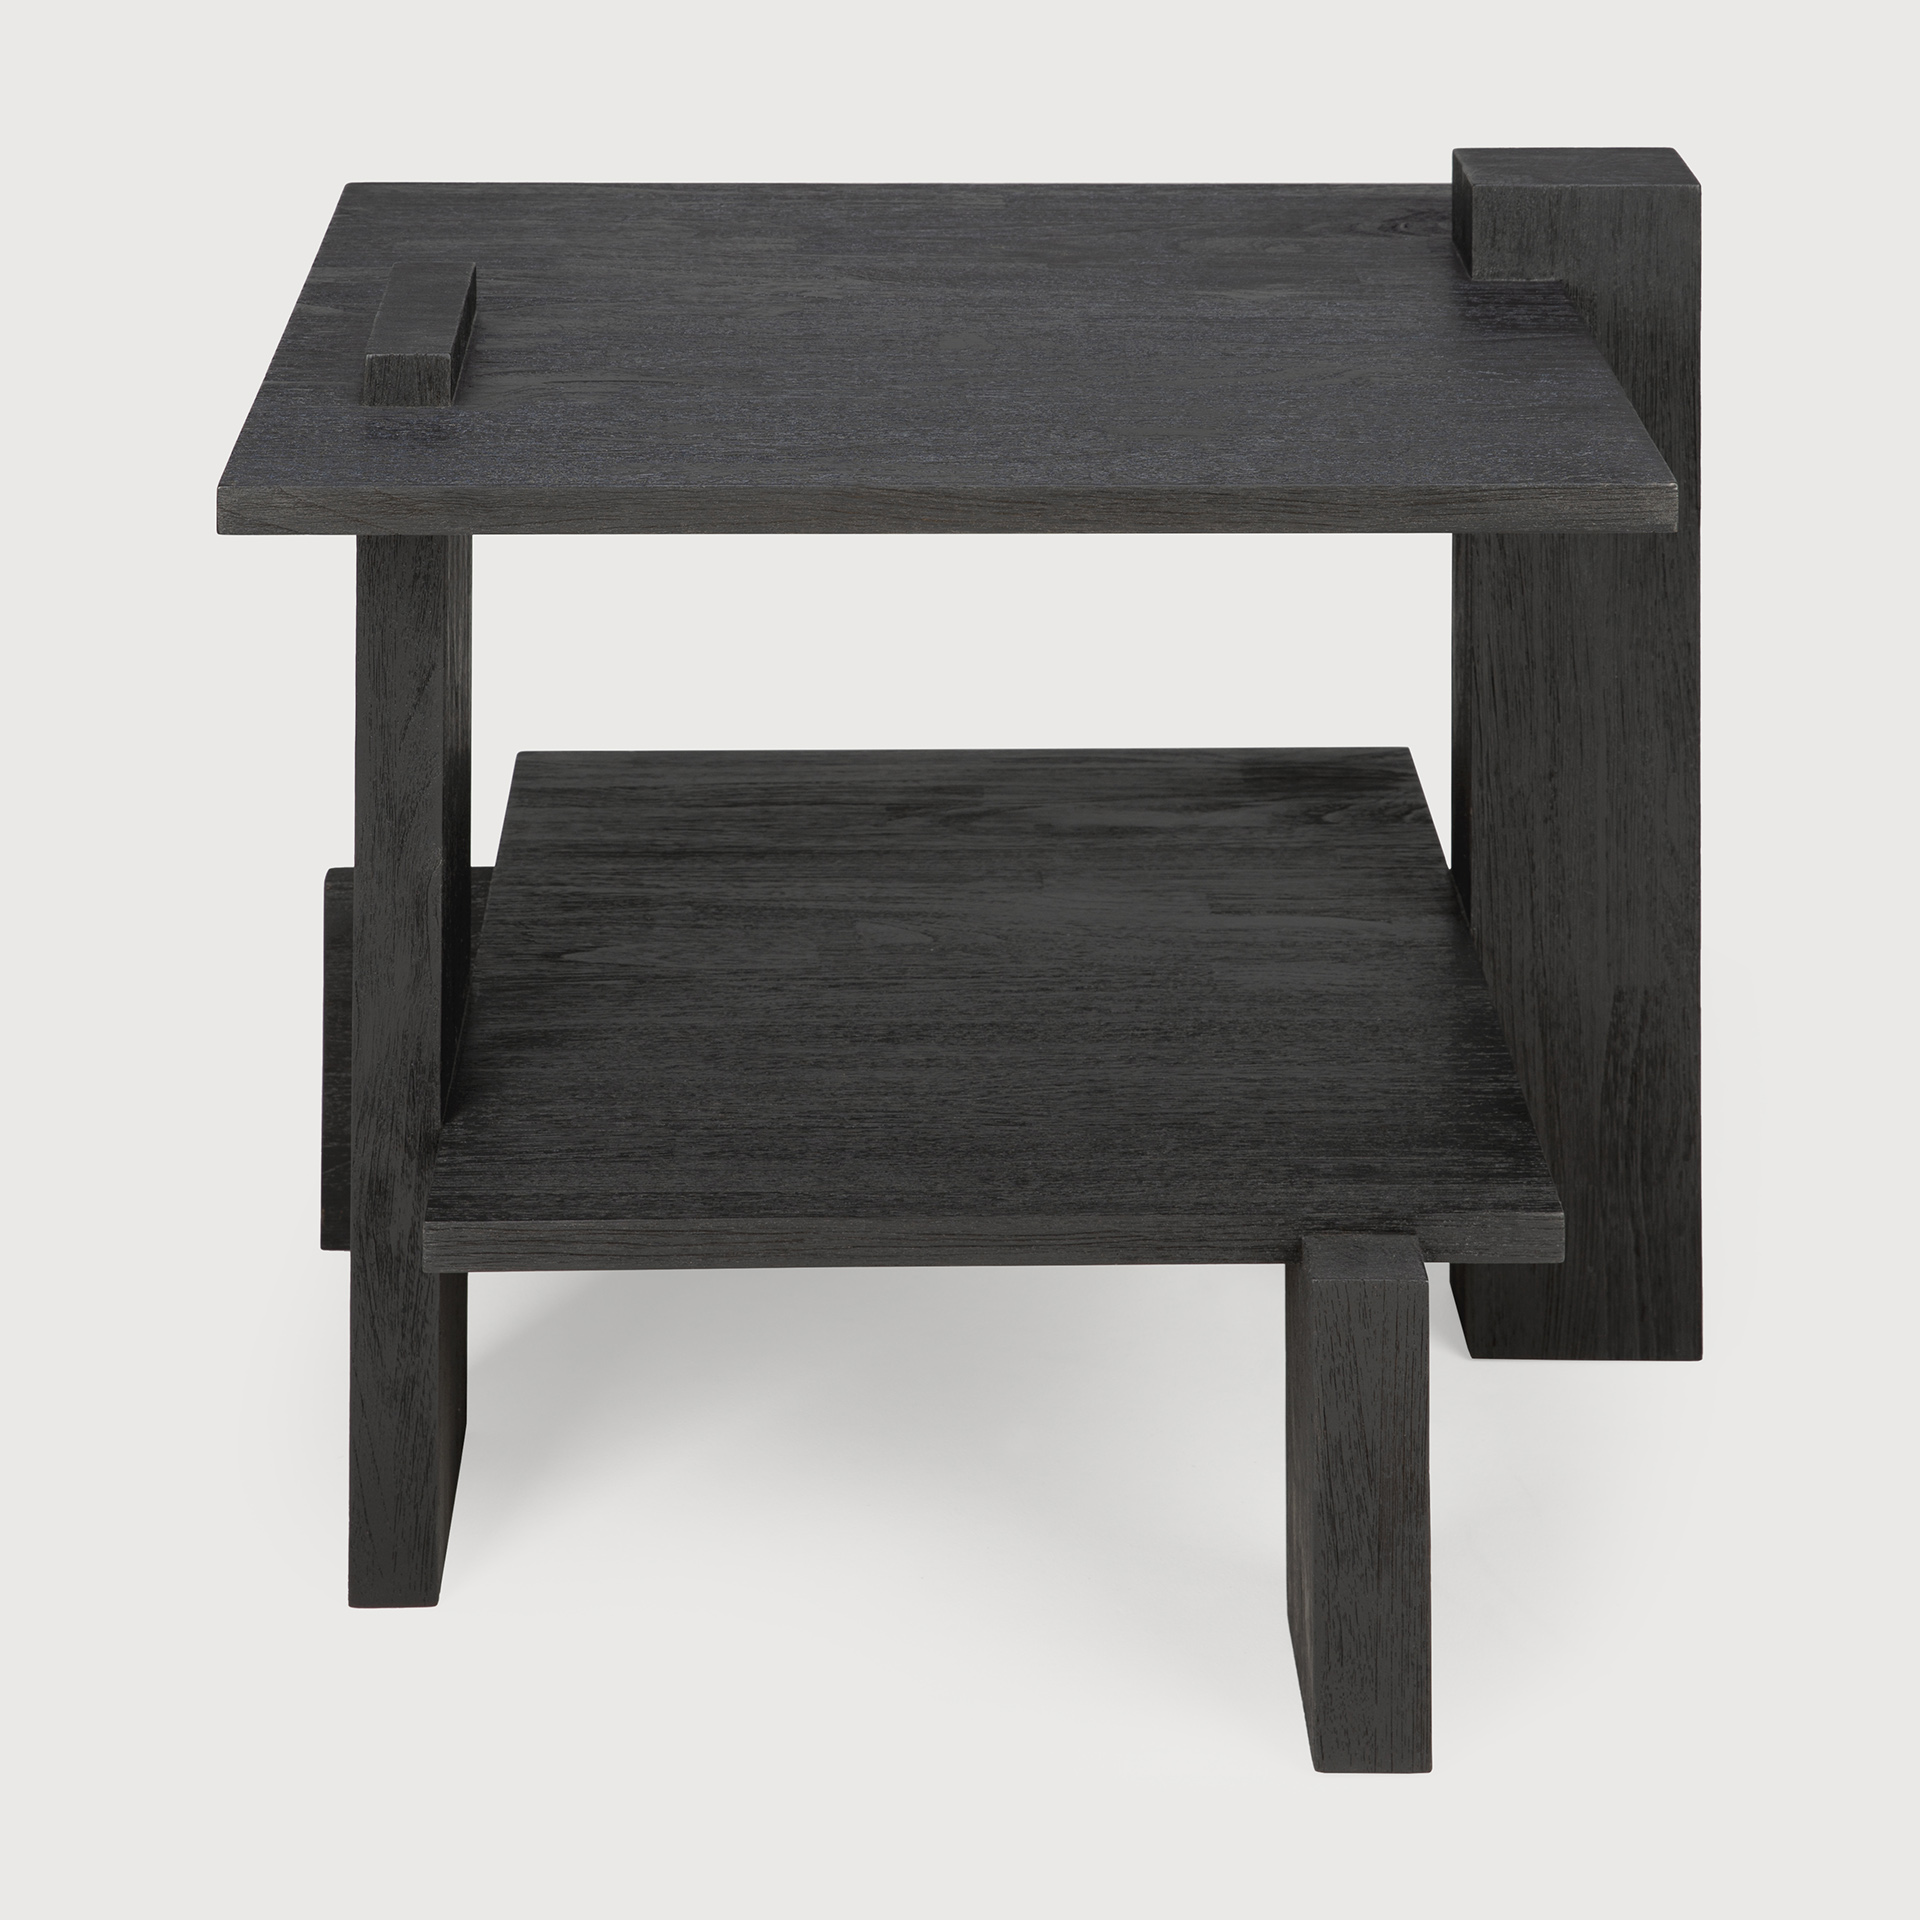 [10120*] Abstract side table